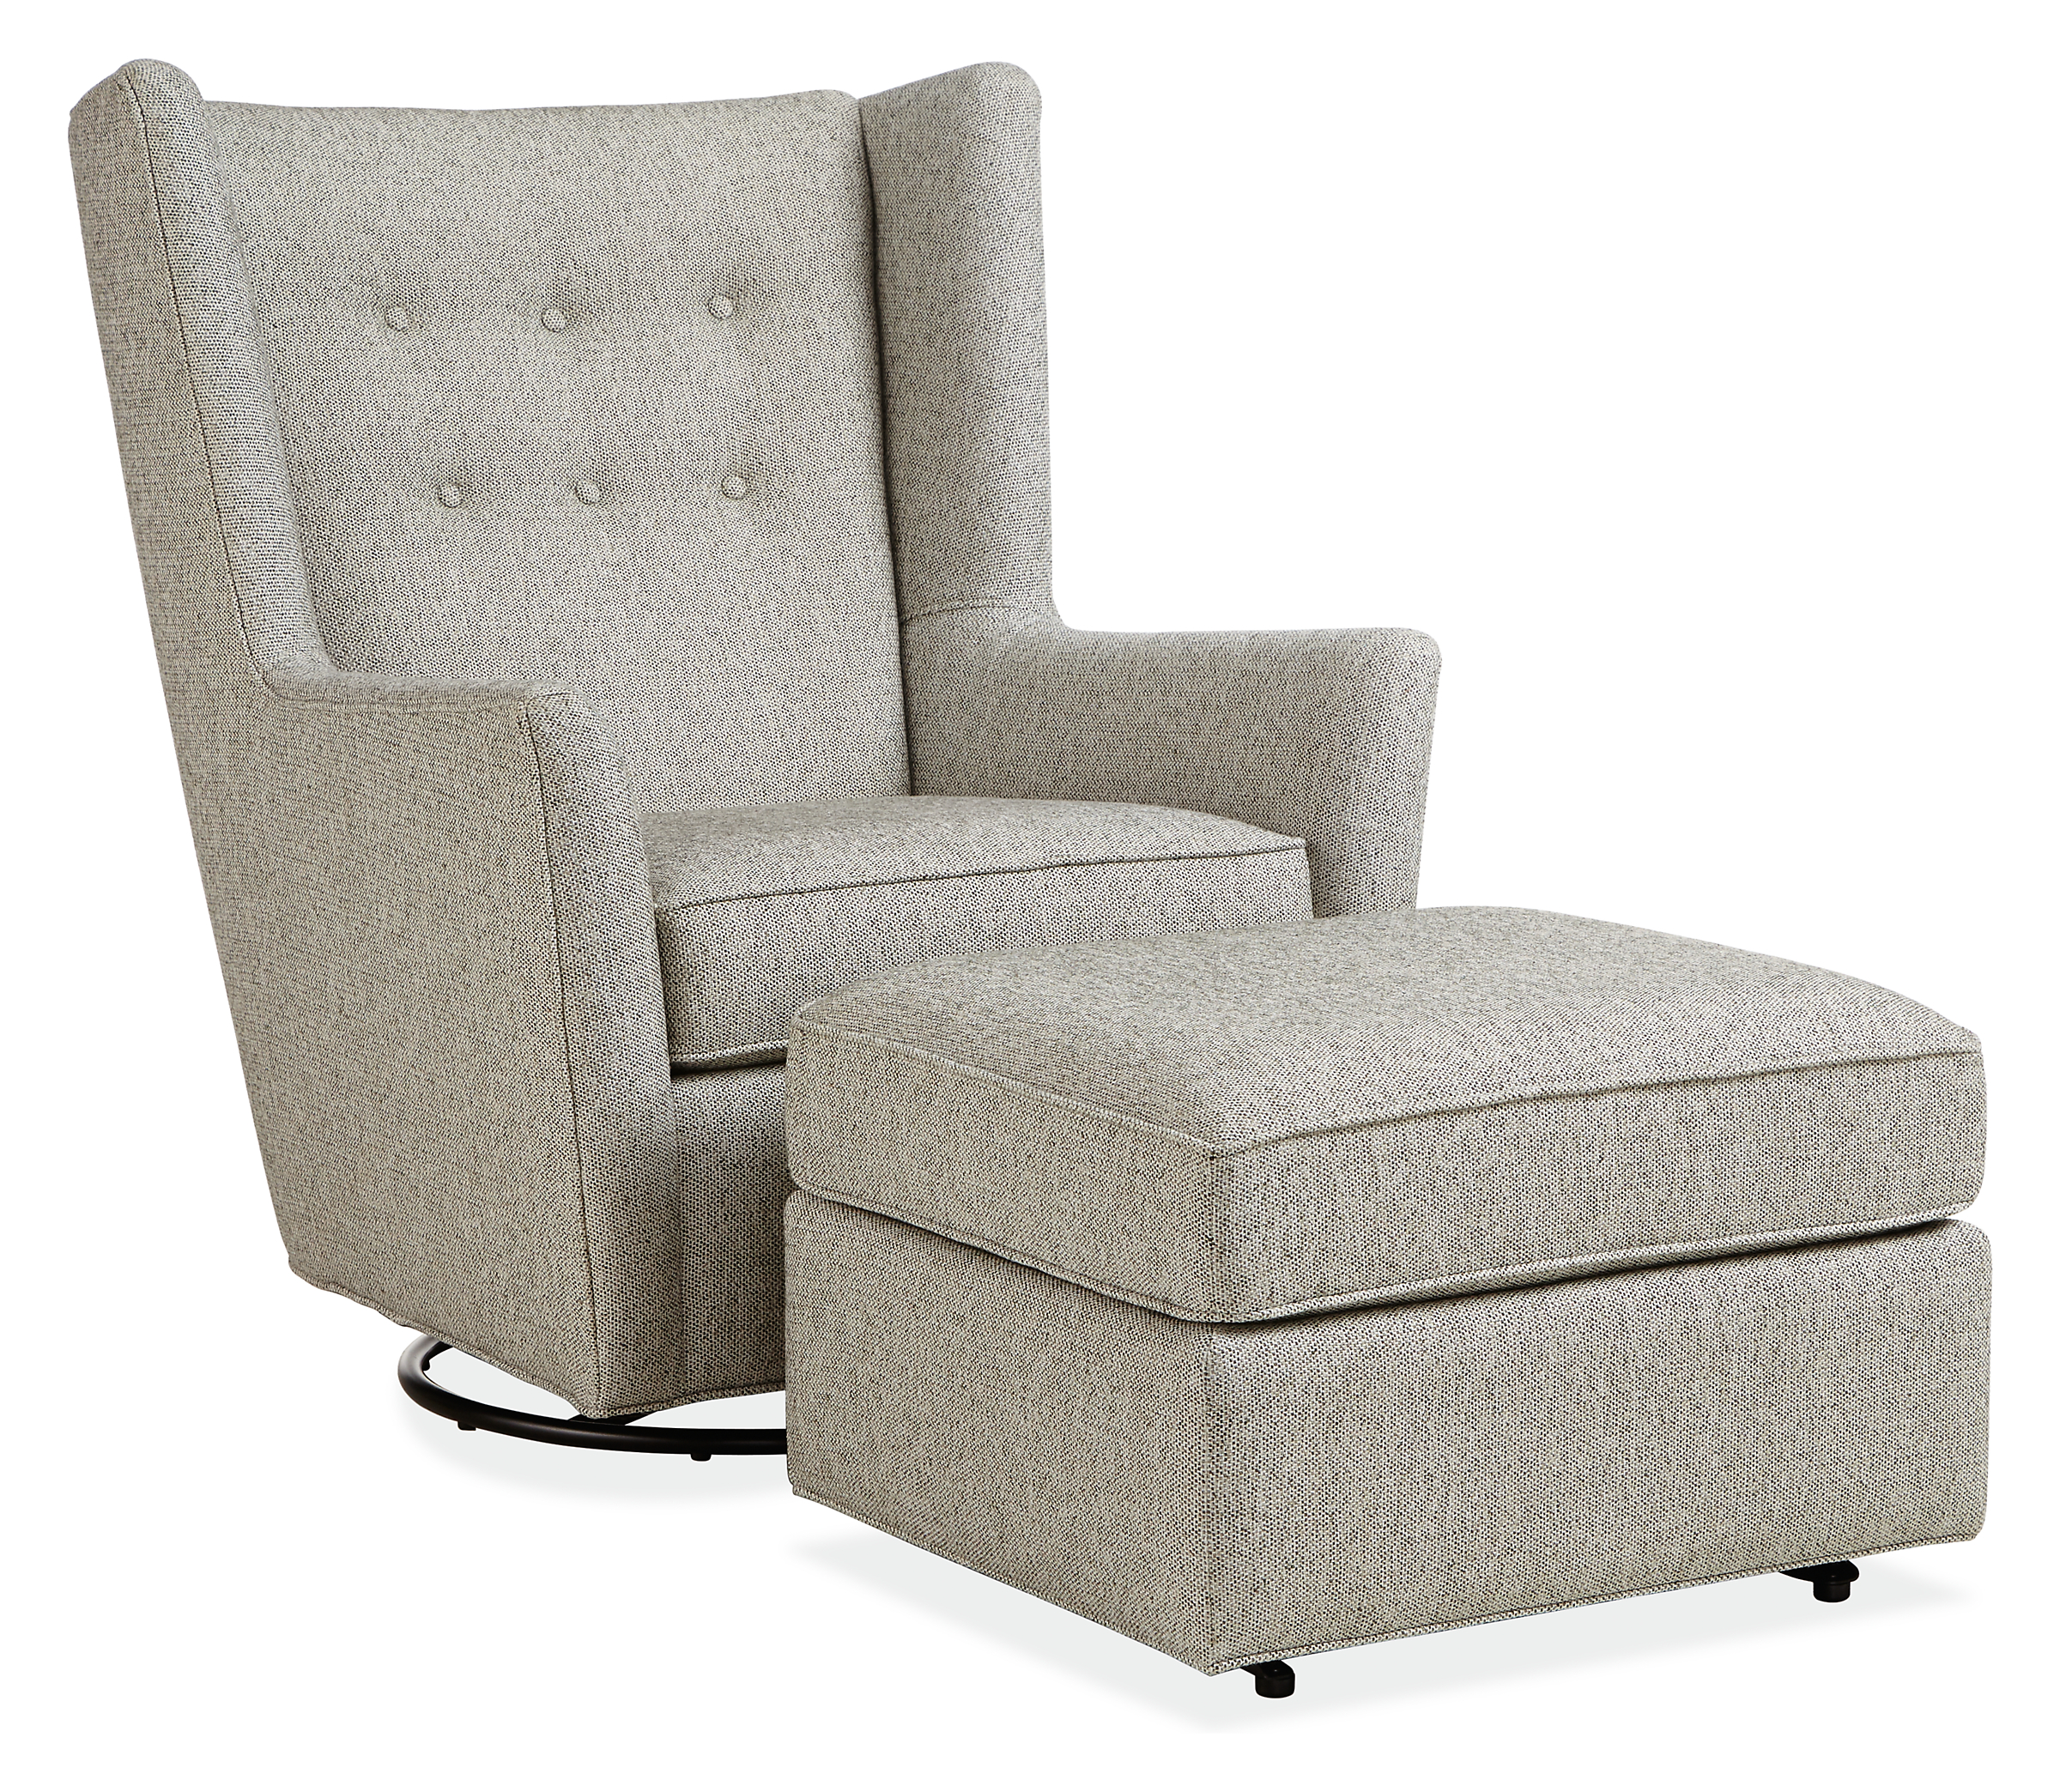 Wren Swivel Glider Chair and Ottoman in Tepic Cement. 